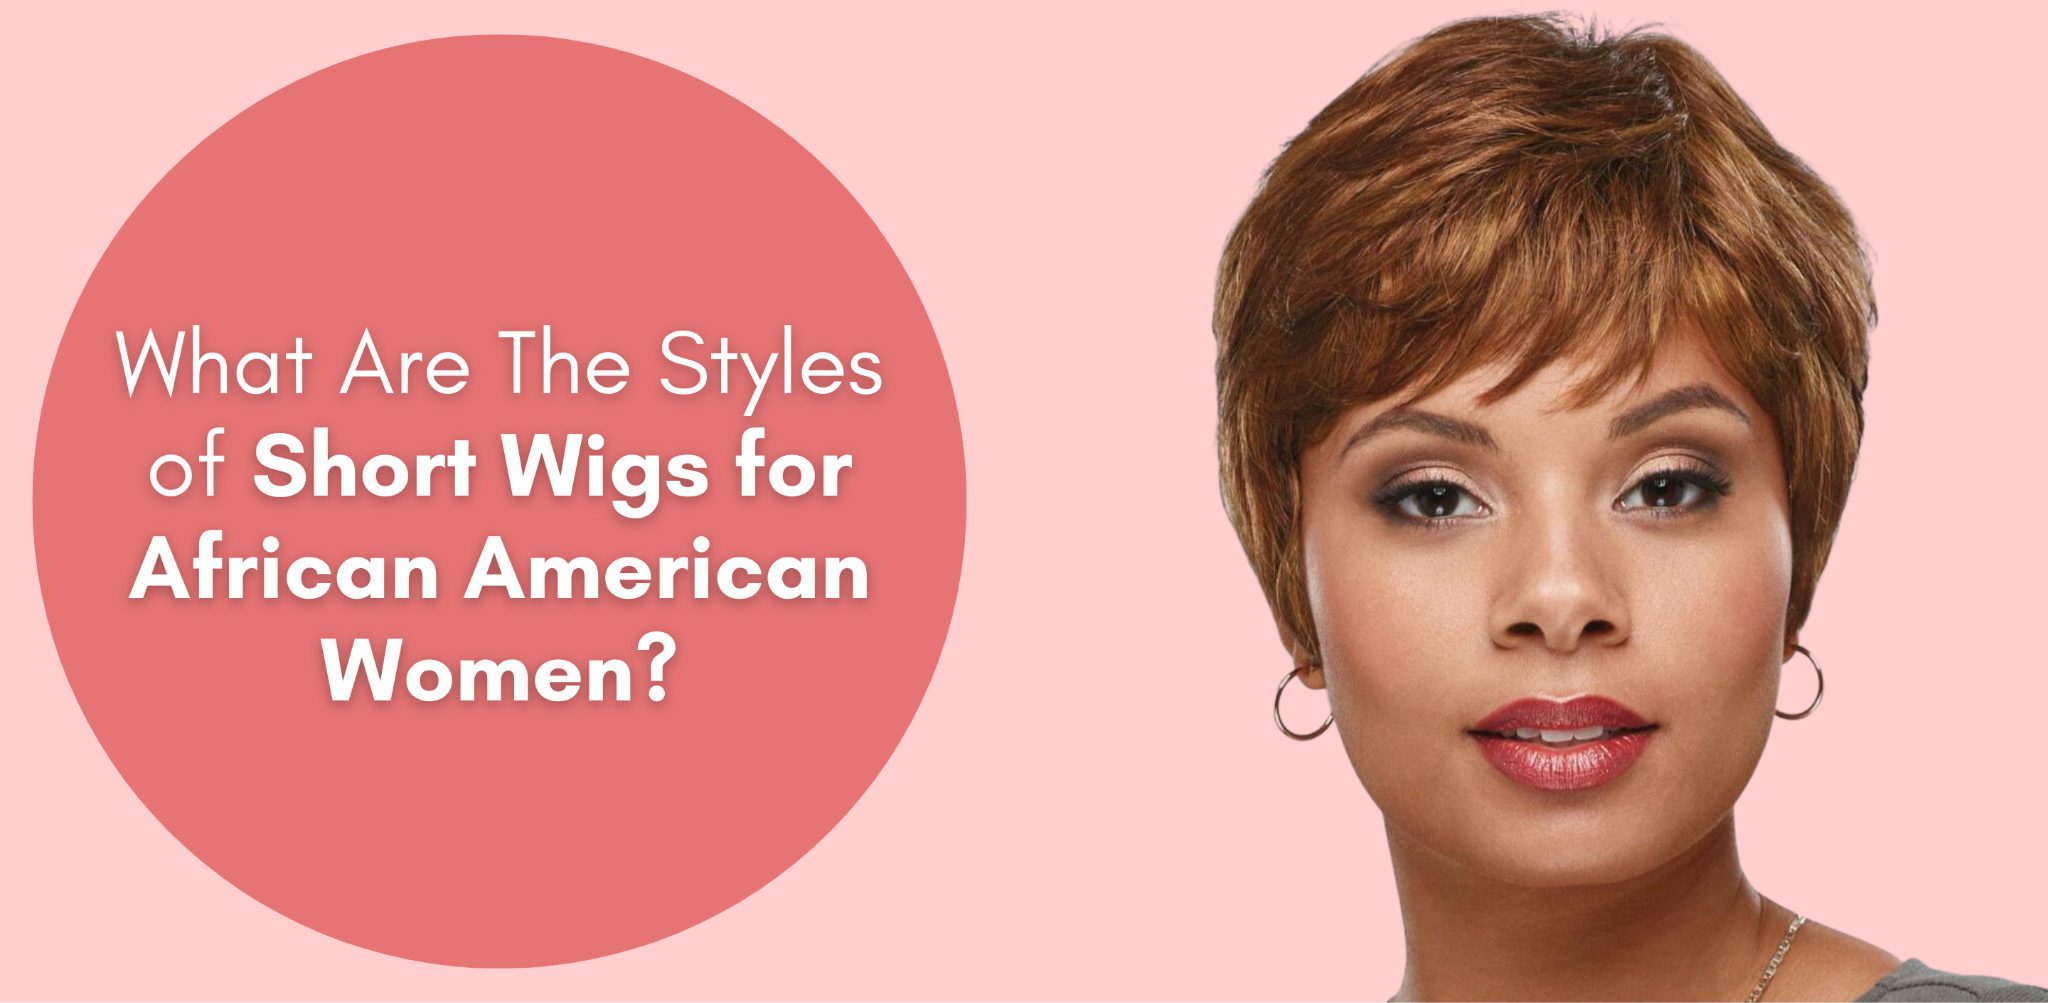 What Are The Styles of Short Wigs for African American Women?